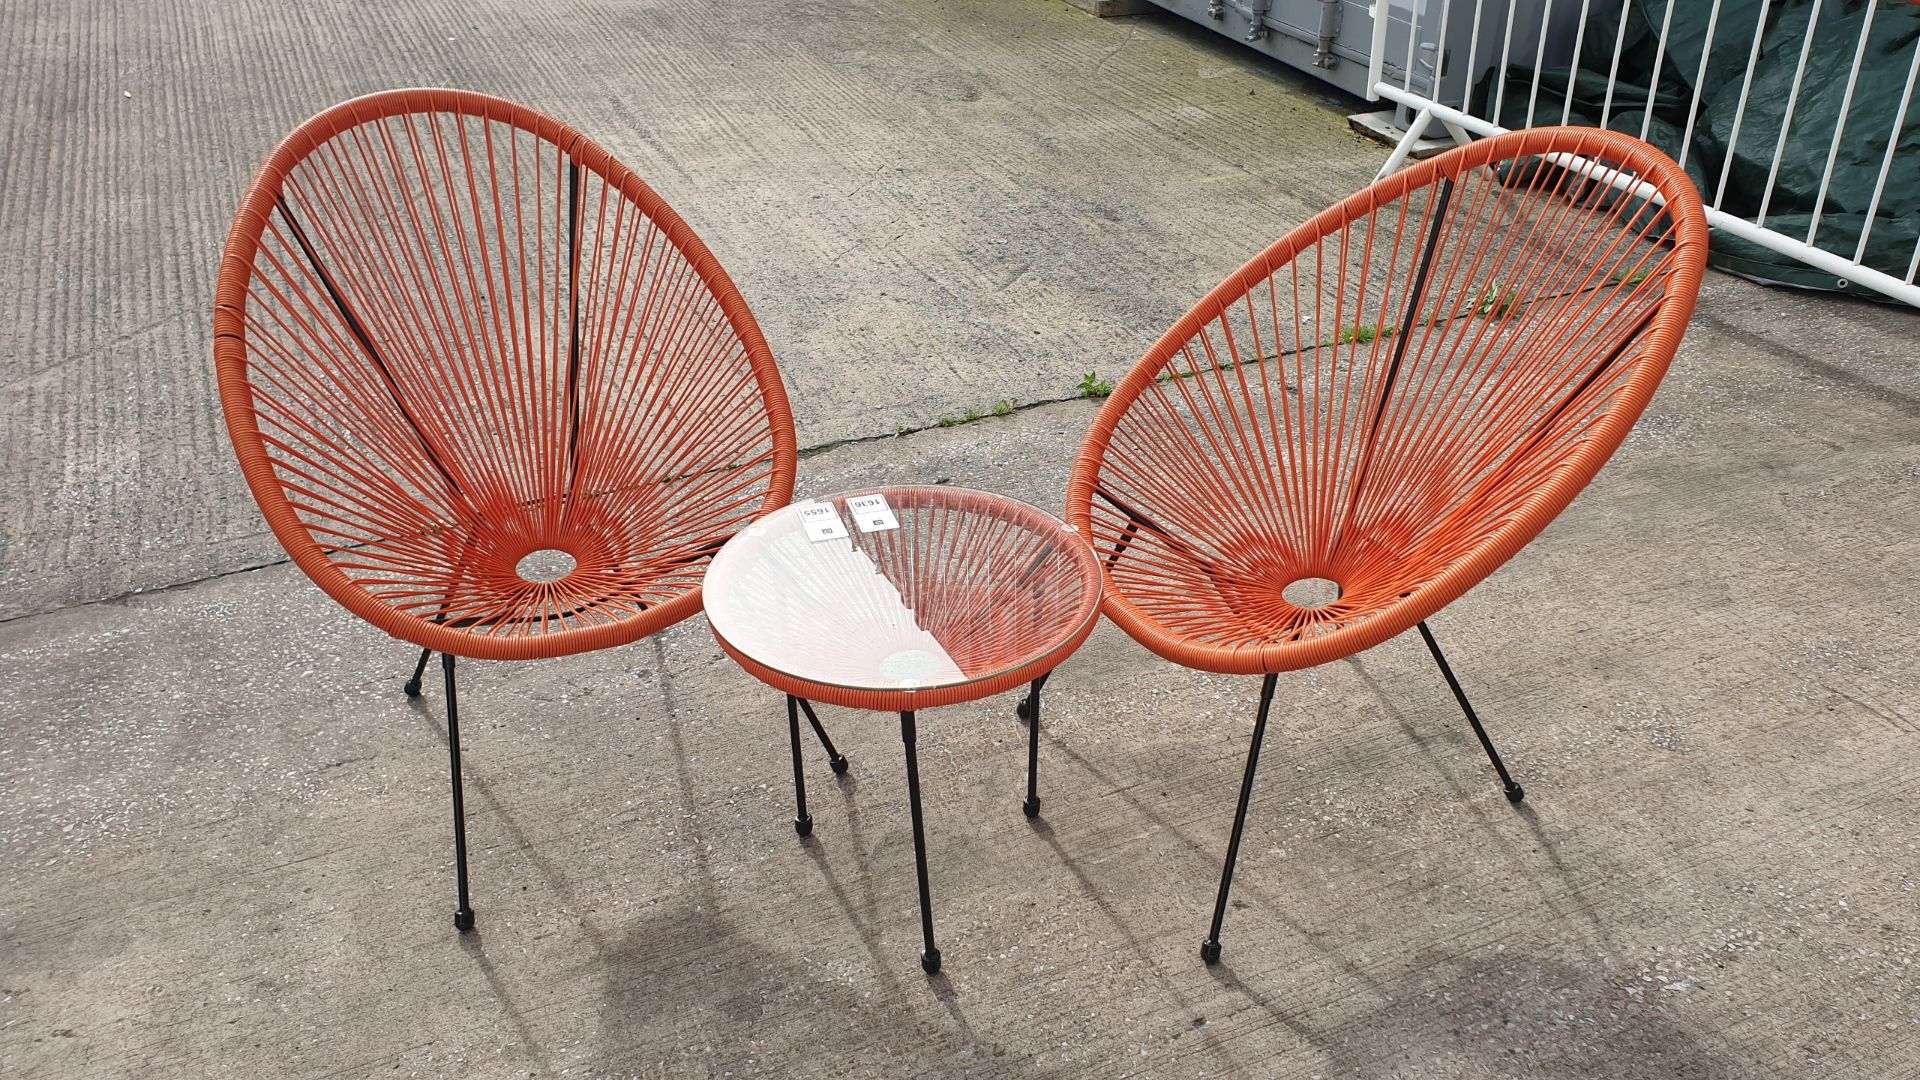 3 PC ORANGE STRING BISTRO SET COMPRISING ROUND COFFEE TABLE WITH TEMPERED GLASS TOP AND 2 SINGLE